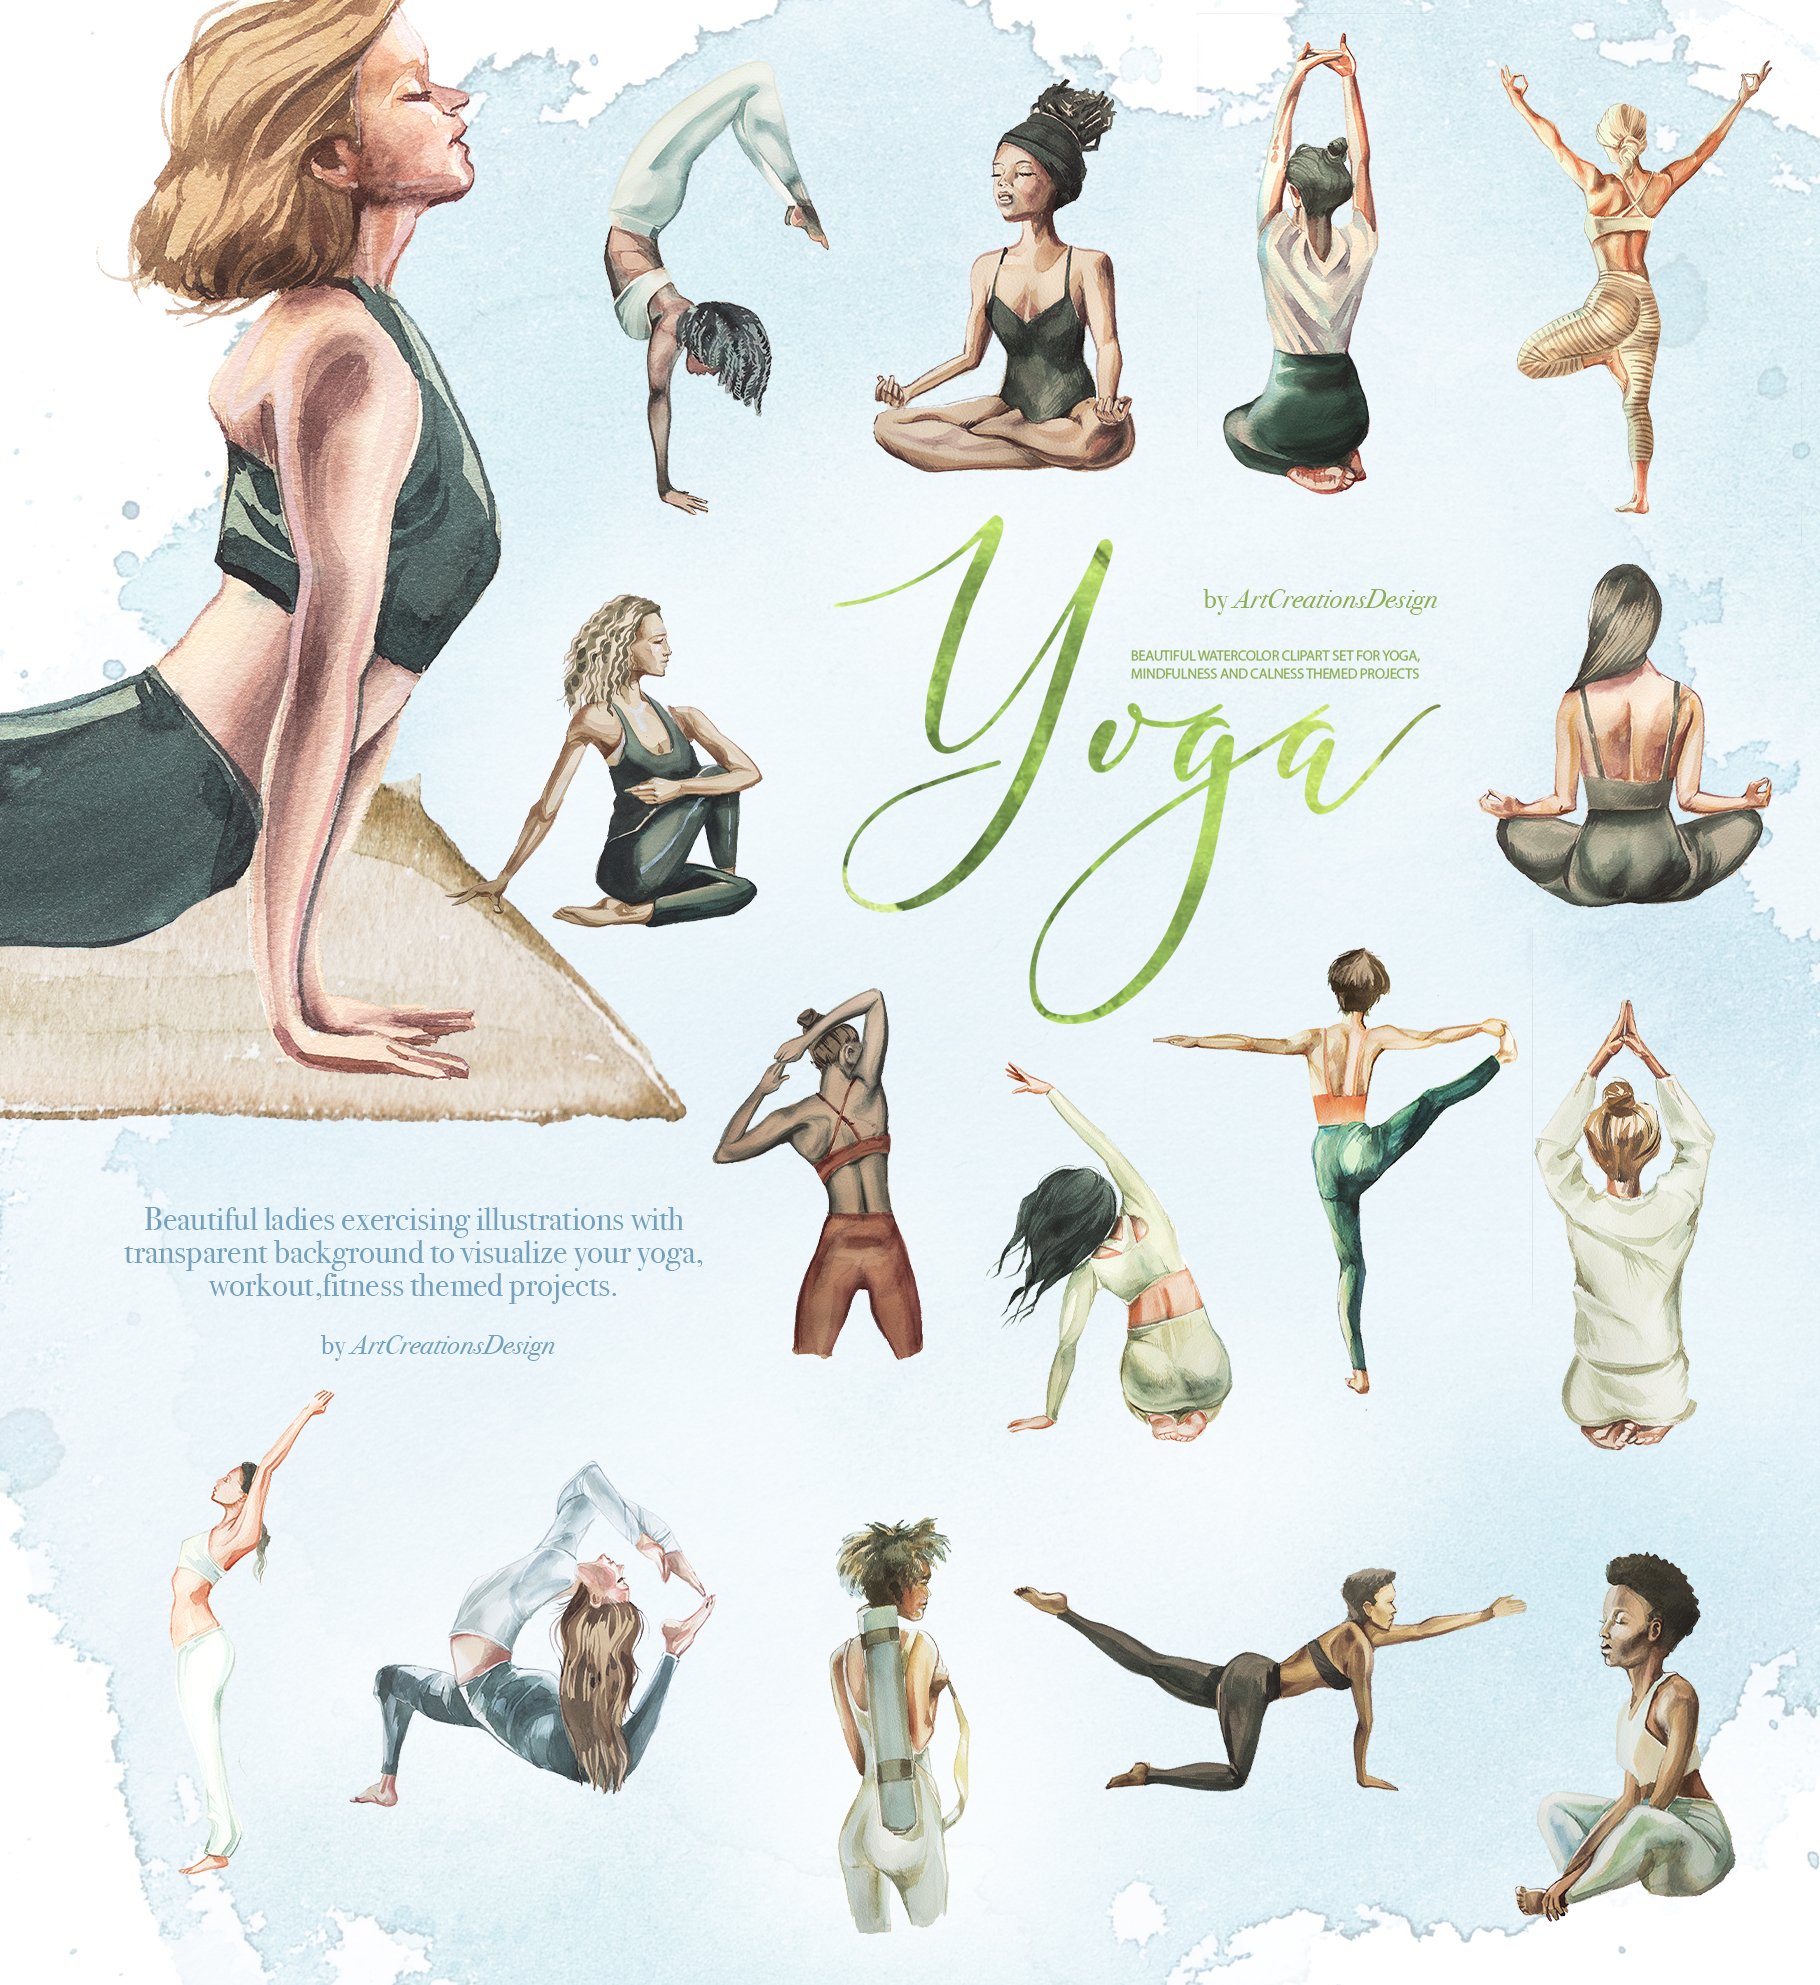 Use it to visualize your yoga, workout or fitness themed projects.